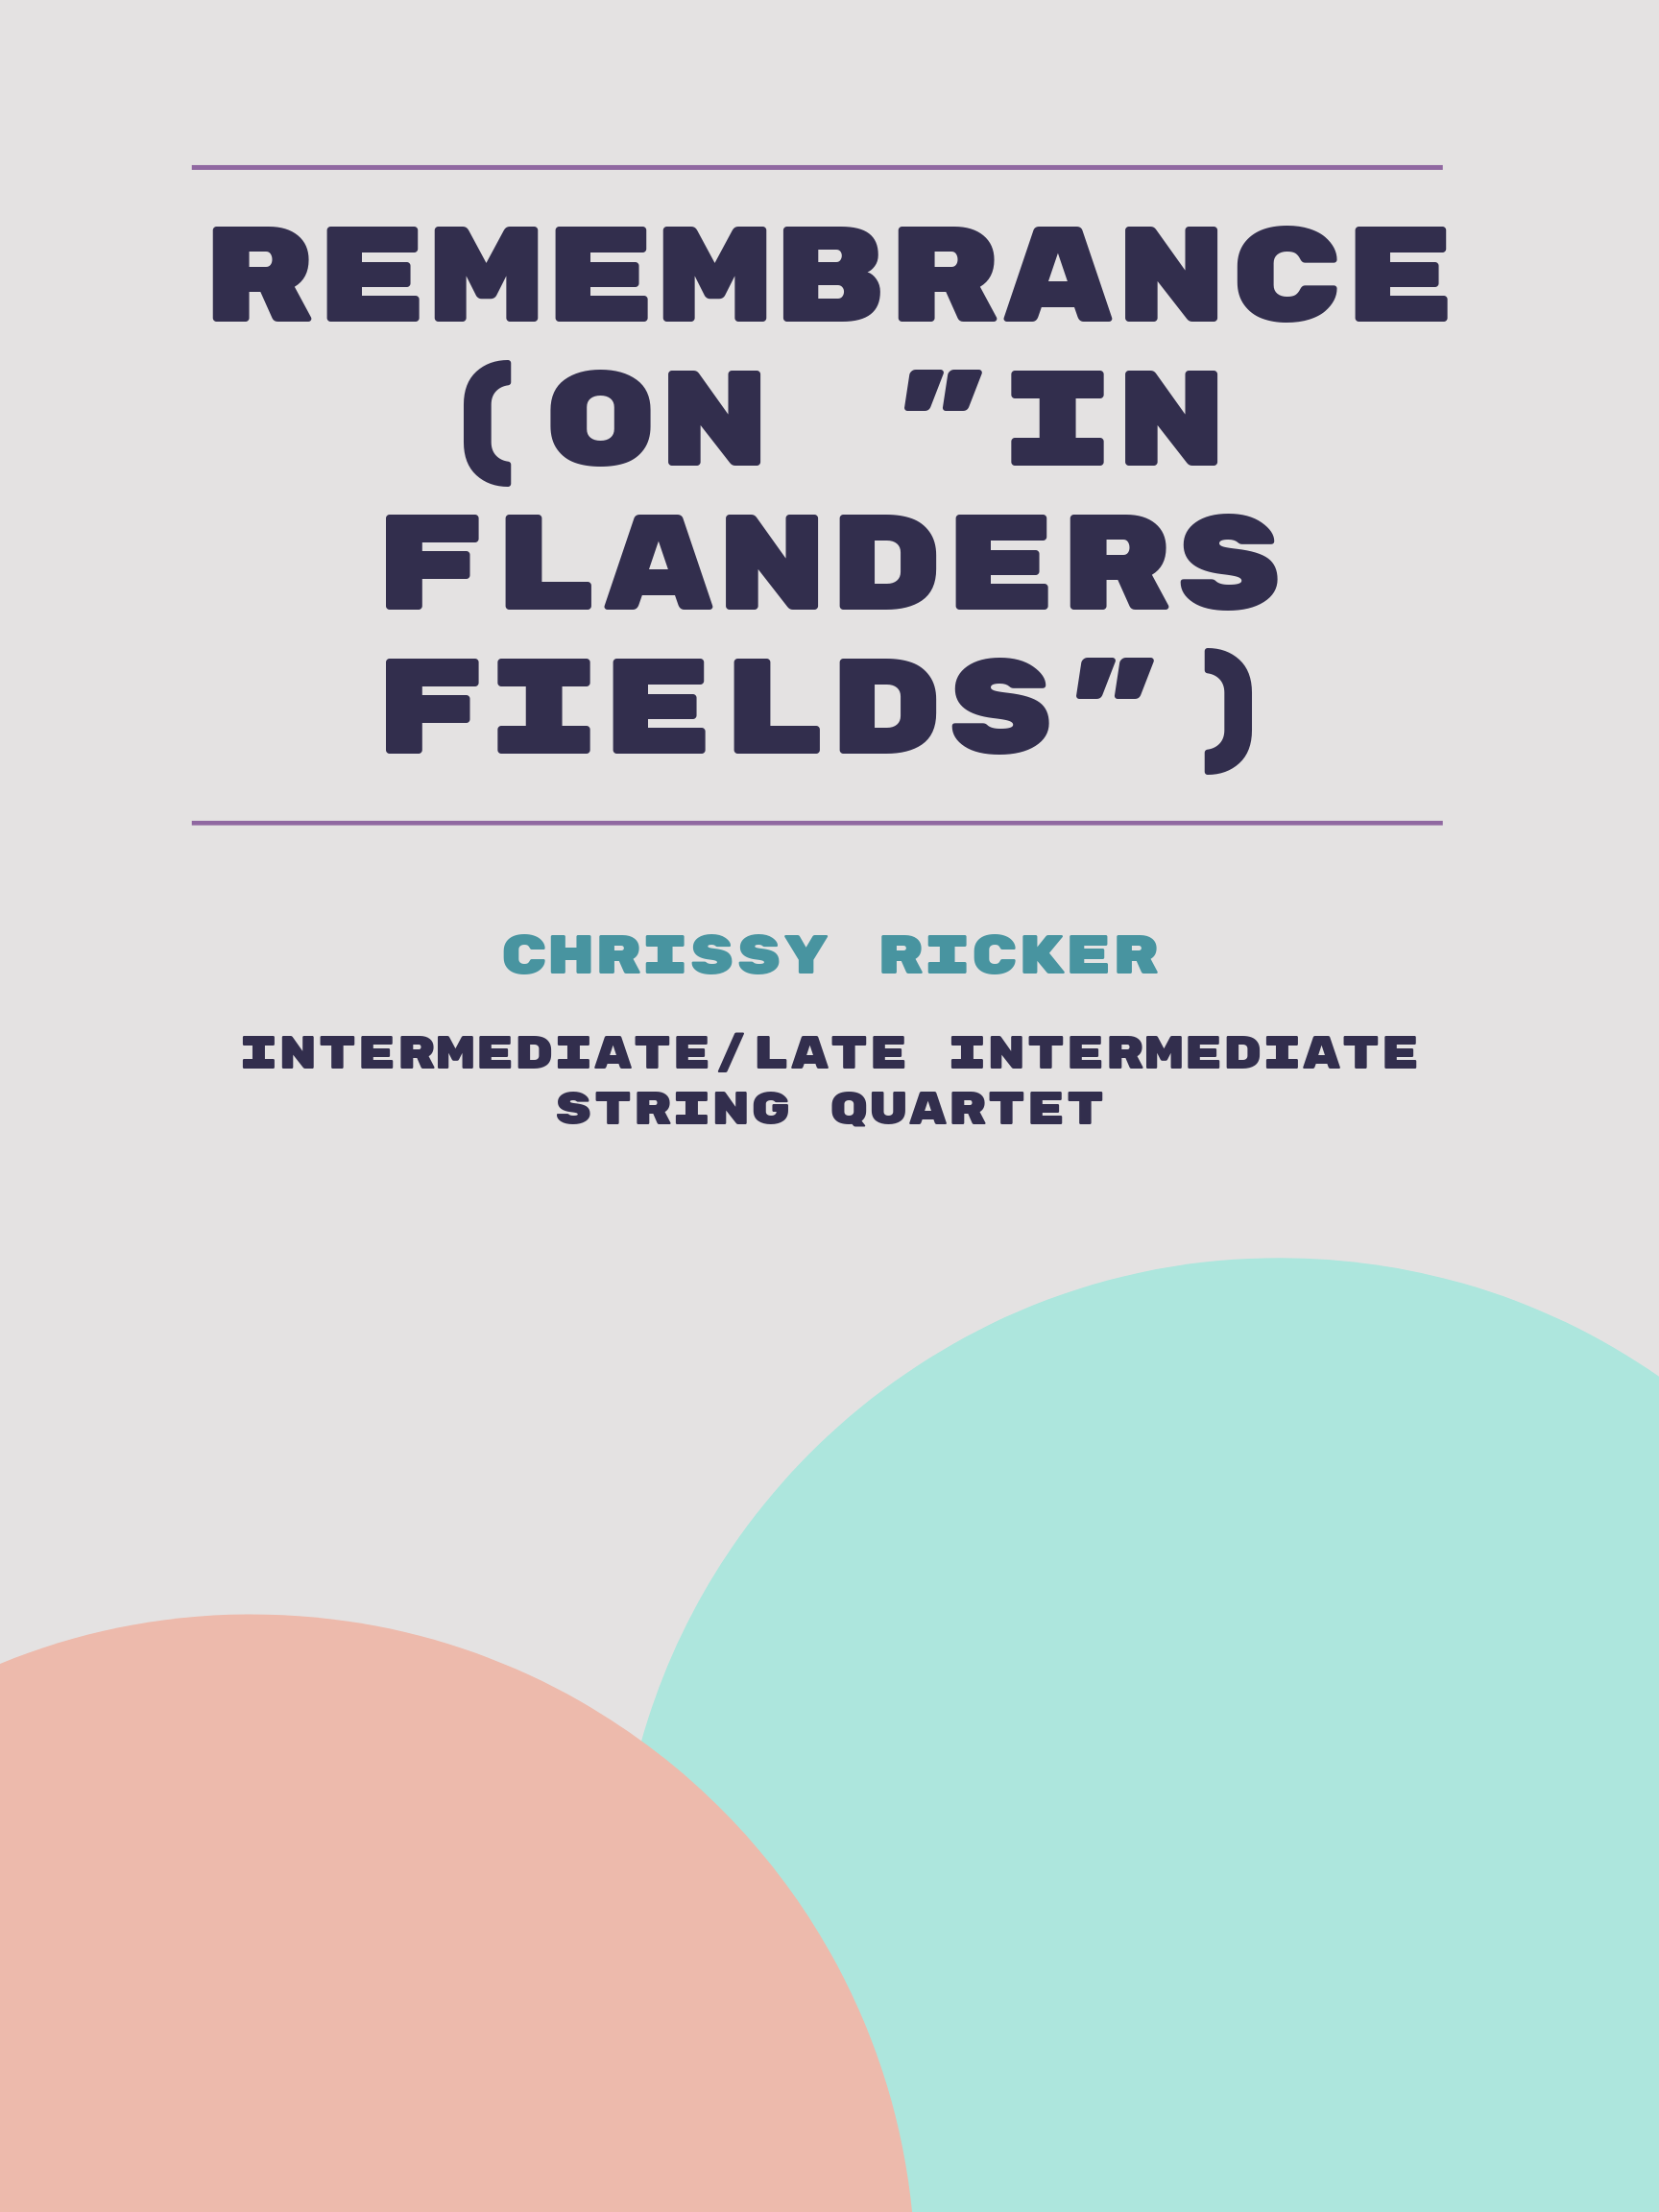 Remembrance (on "In Flanders Fields") by Chrissy Ricker